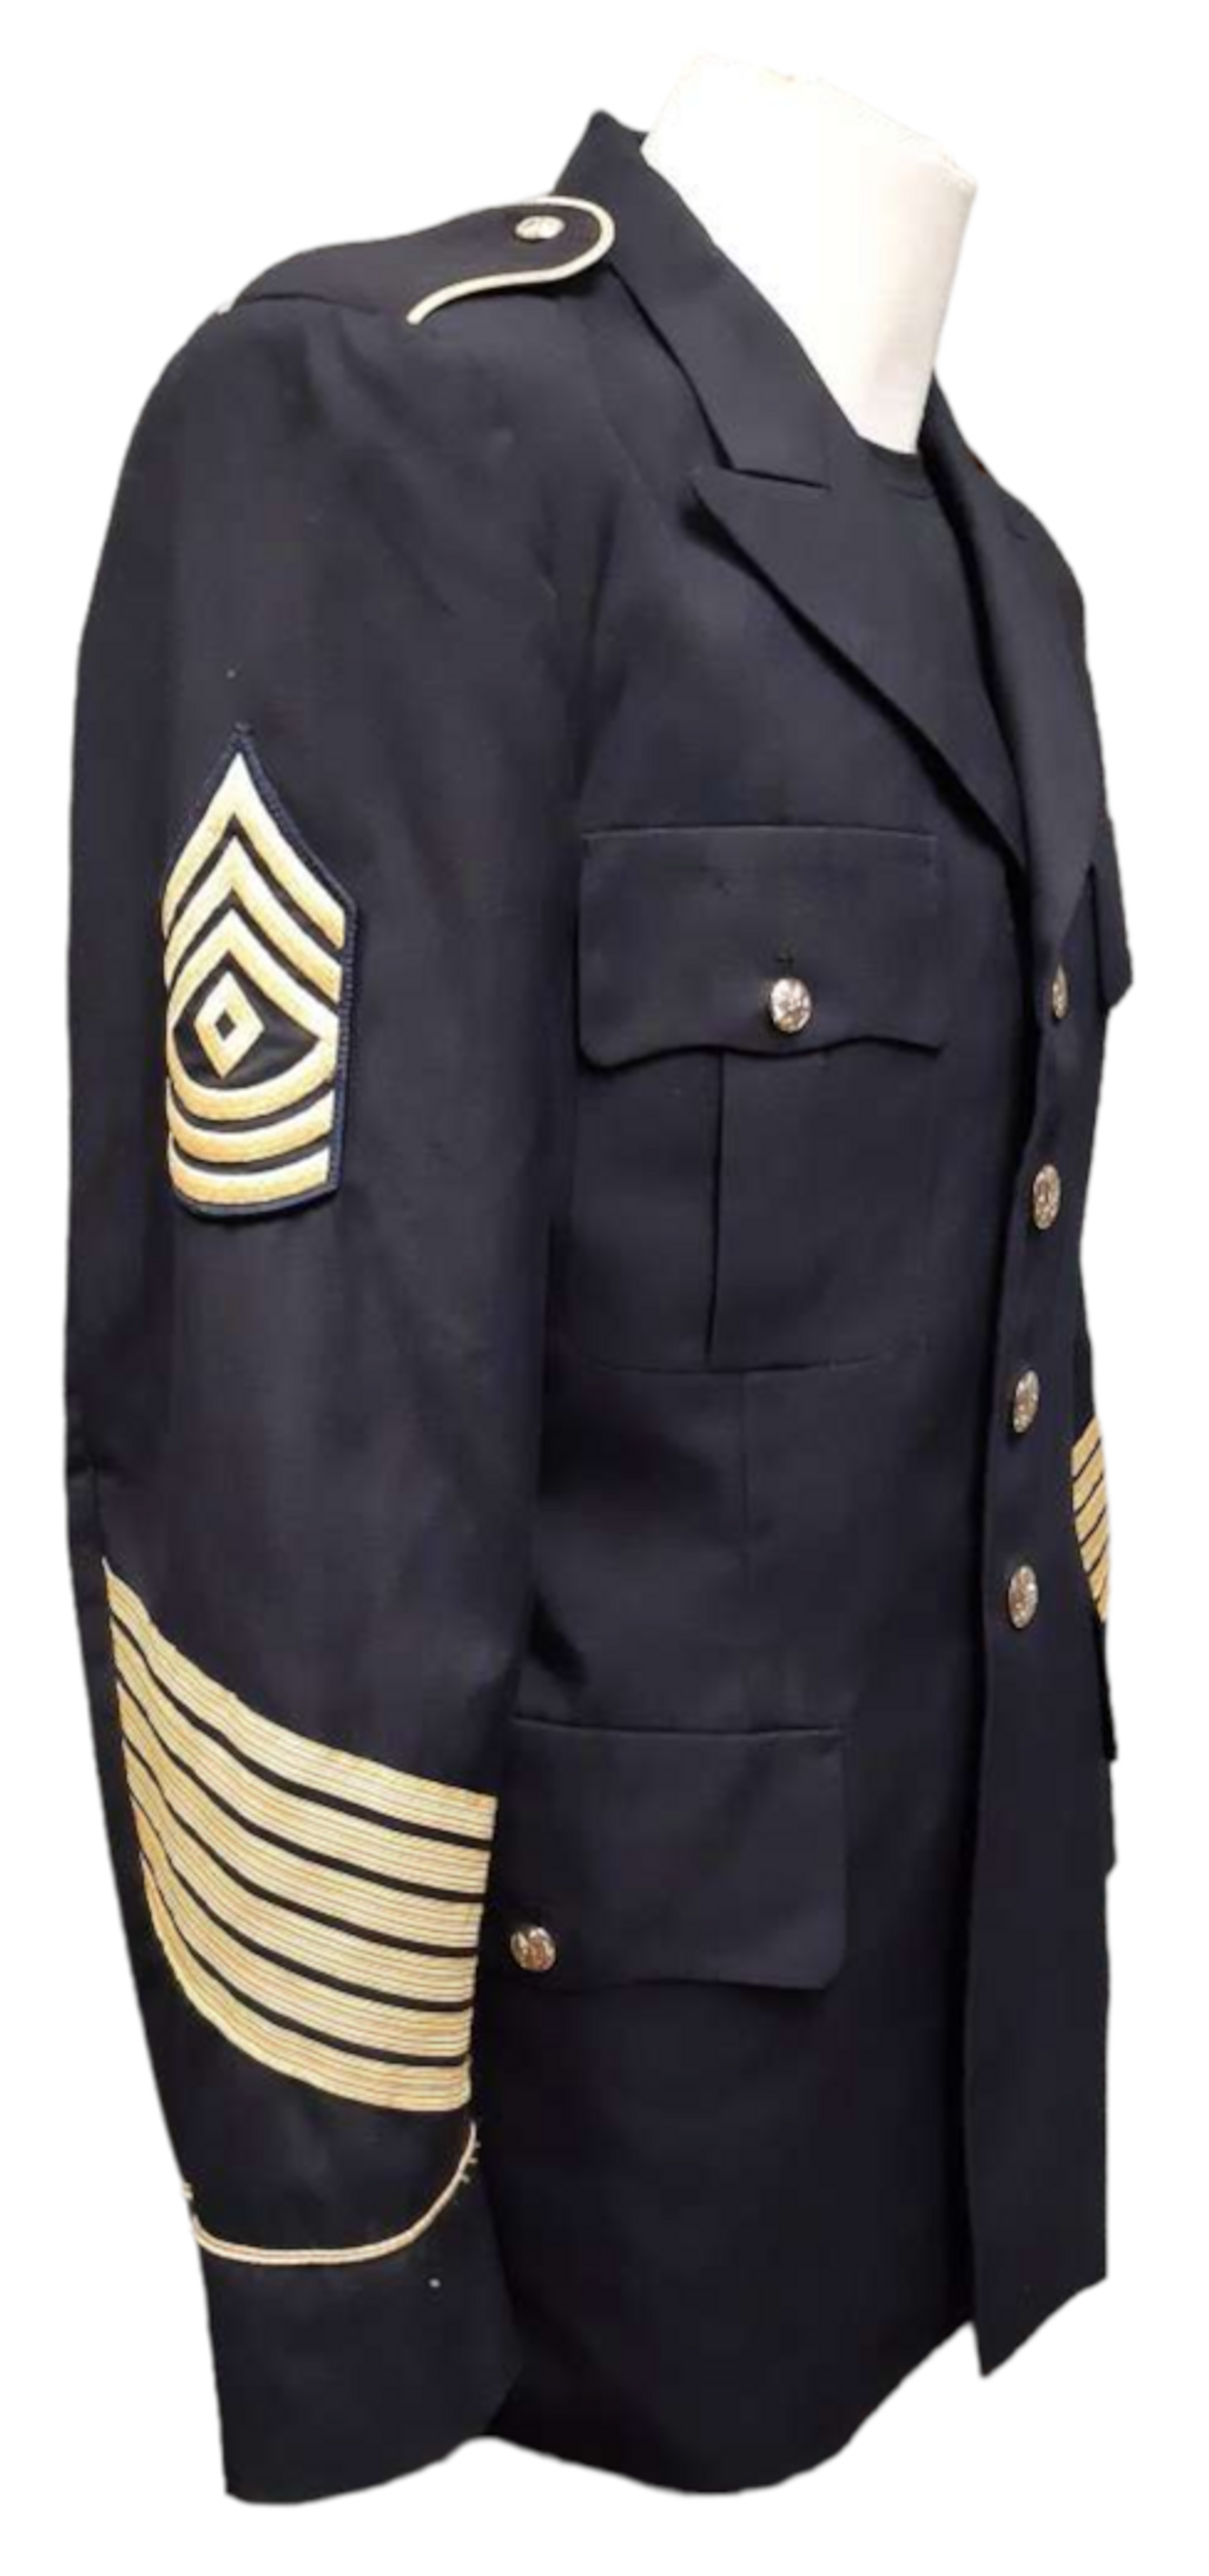 US Armed Forces Class A Service Uniform - First Sergeant